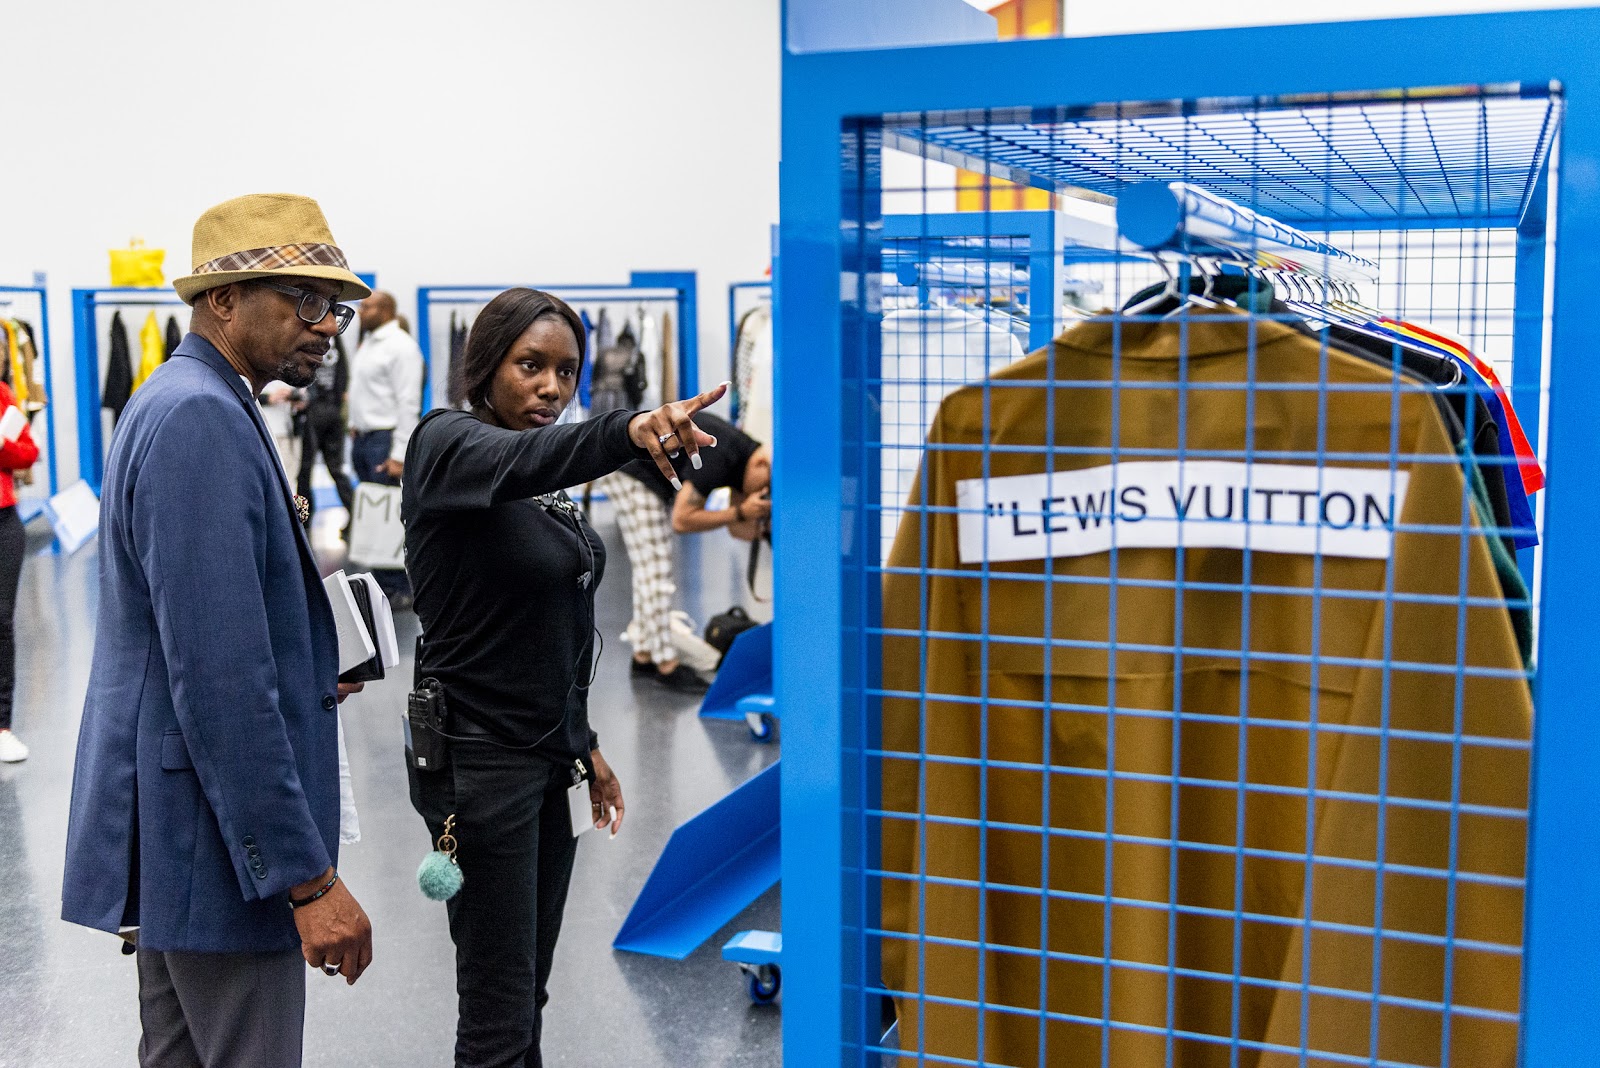 What was your favorite piece from the Louis Vuitton MCA popup